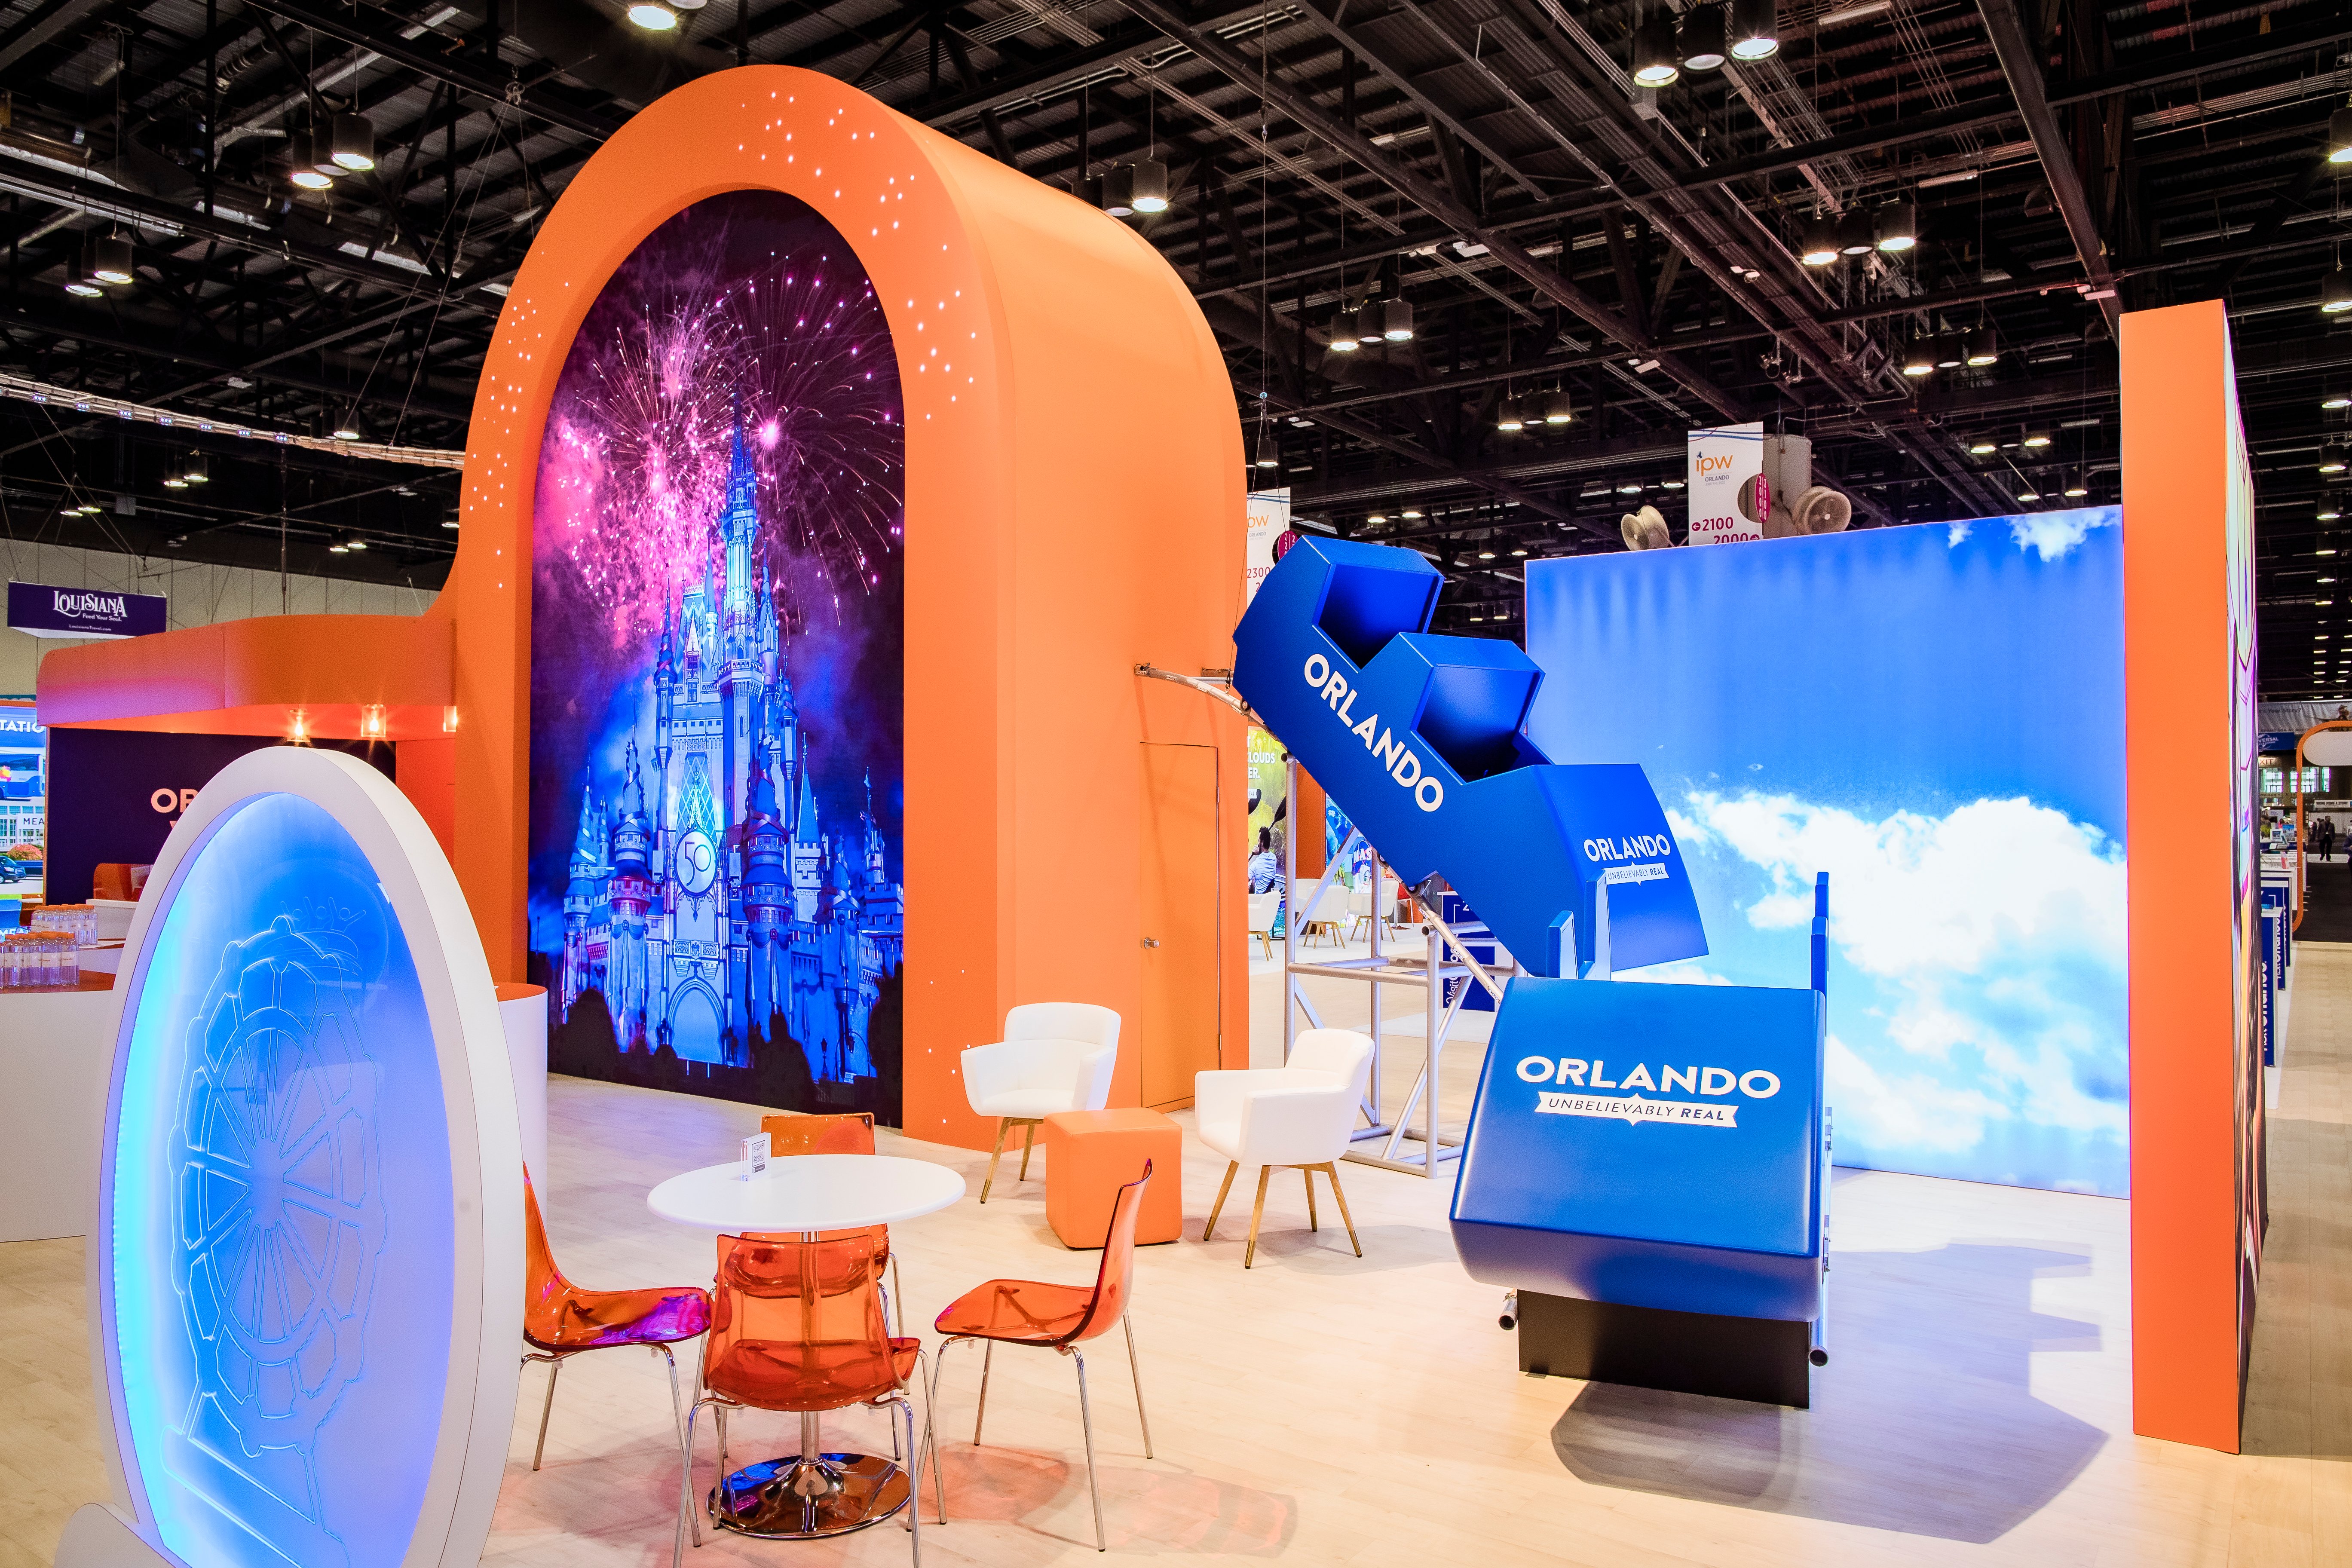 An image of the Visit orlando booth at IPW.  We can see a prop roller coaster, a table with orange chairs, in front of it,  and an orange arched wall with a moving image of the Cinderella Tower at Walt Disney World to the left. 